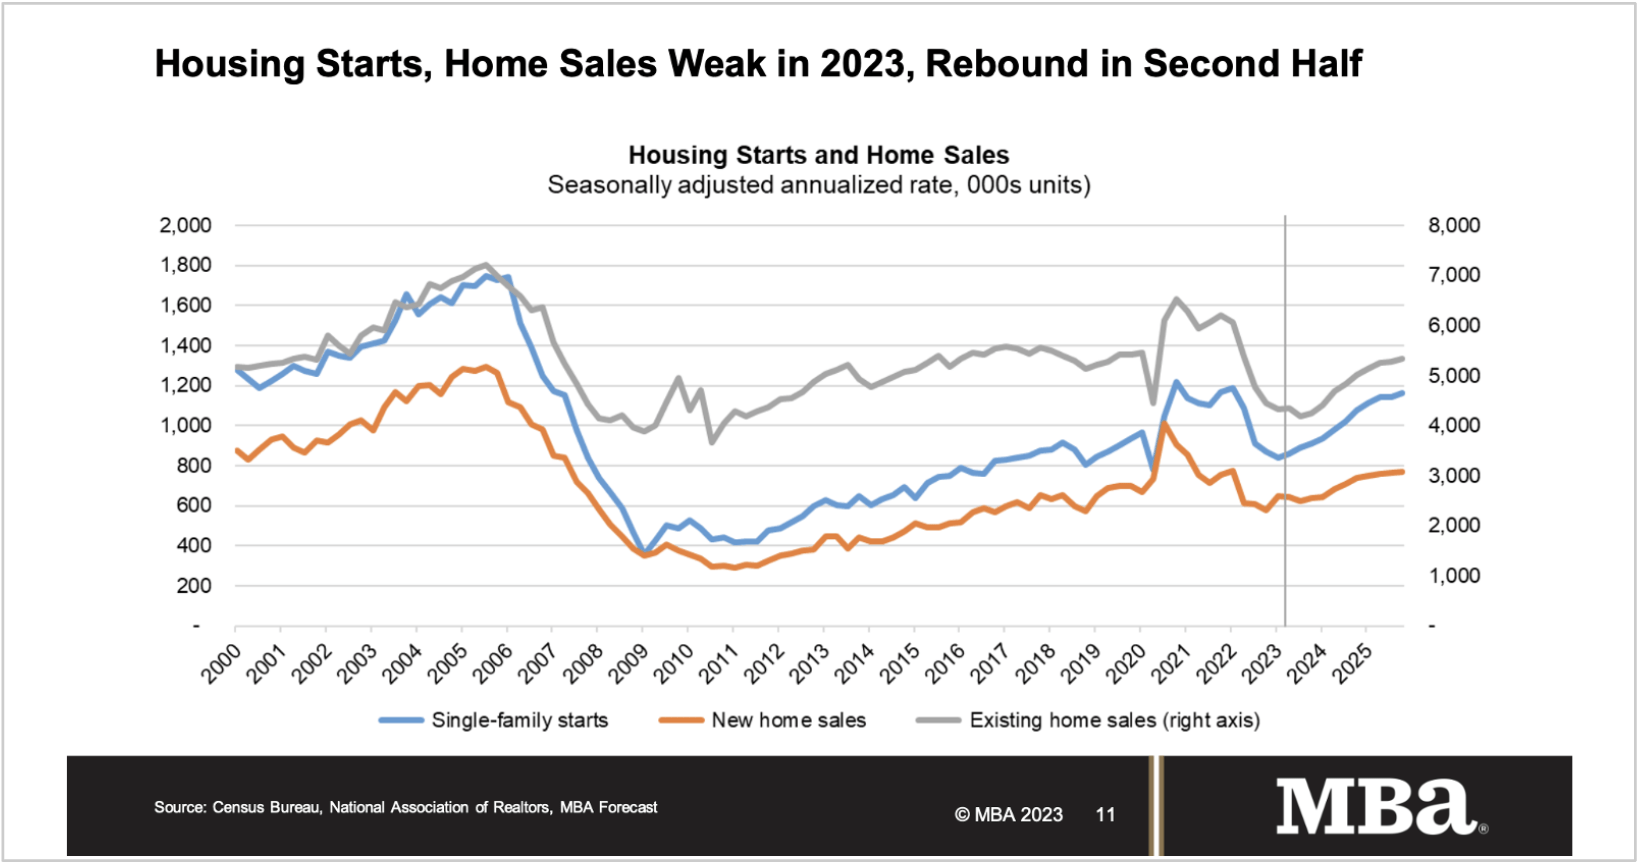 MBA predicts existing home sales, new home sales, housing starts recover in second half of 2023 after starting weaker - The Basis Point